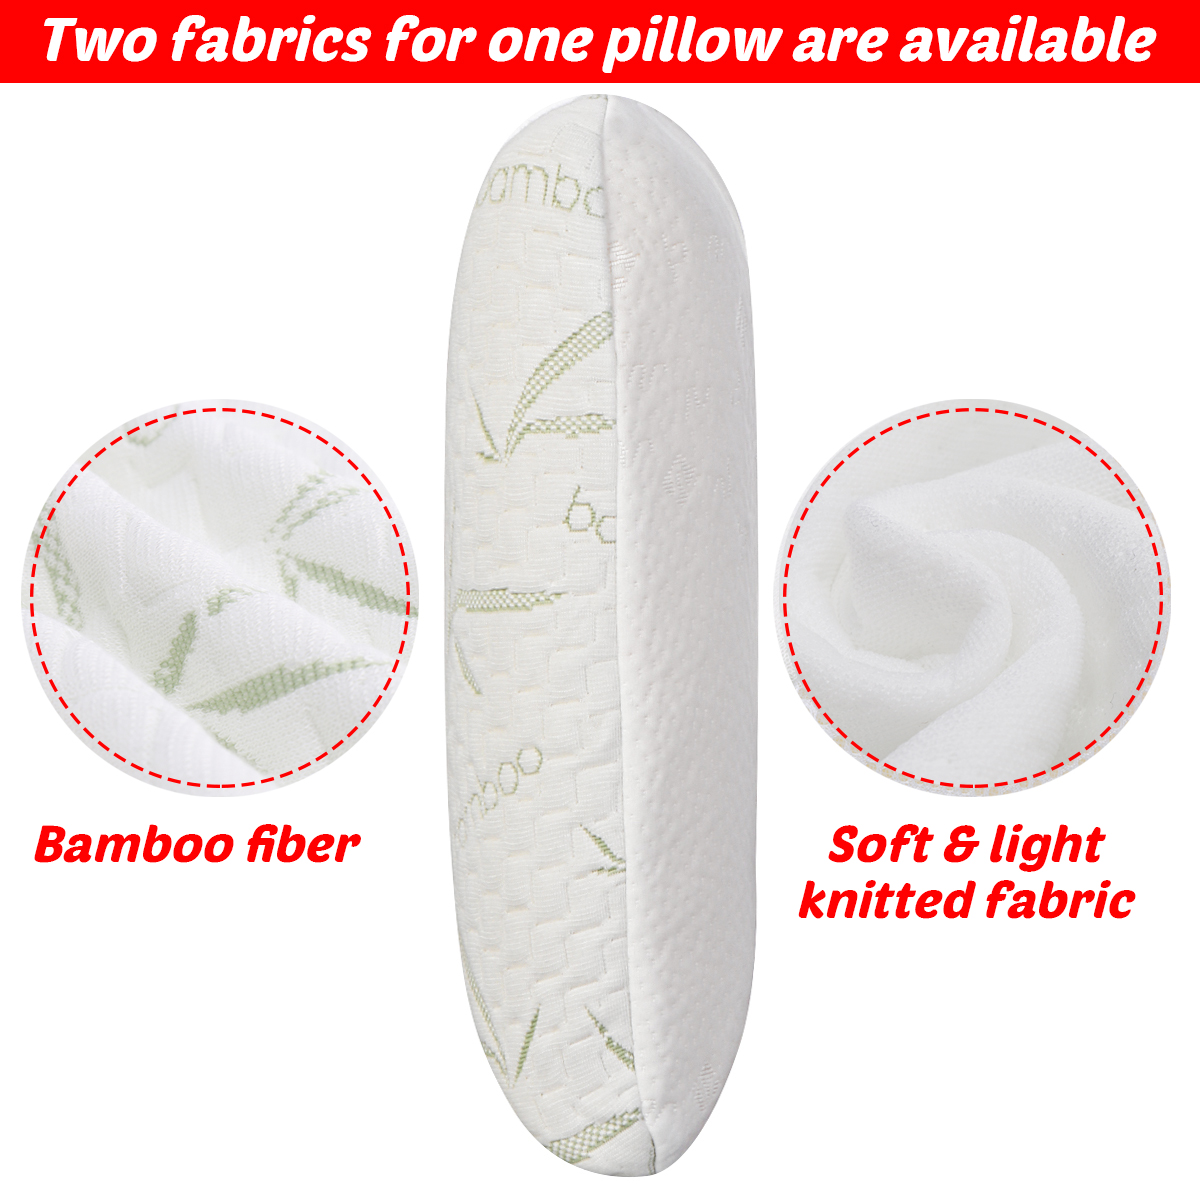 Bamboo-Memory-Foam-Pillow-Reversible-Pillow-Orthopedic-Slow-Rebound-Cervical-Neck-Pain-Relief-1813962-3